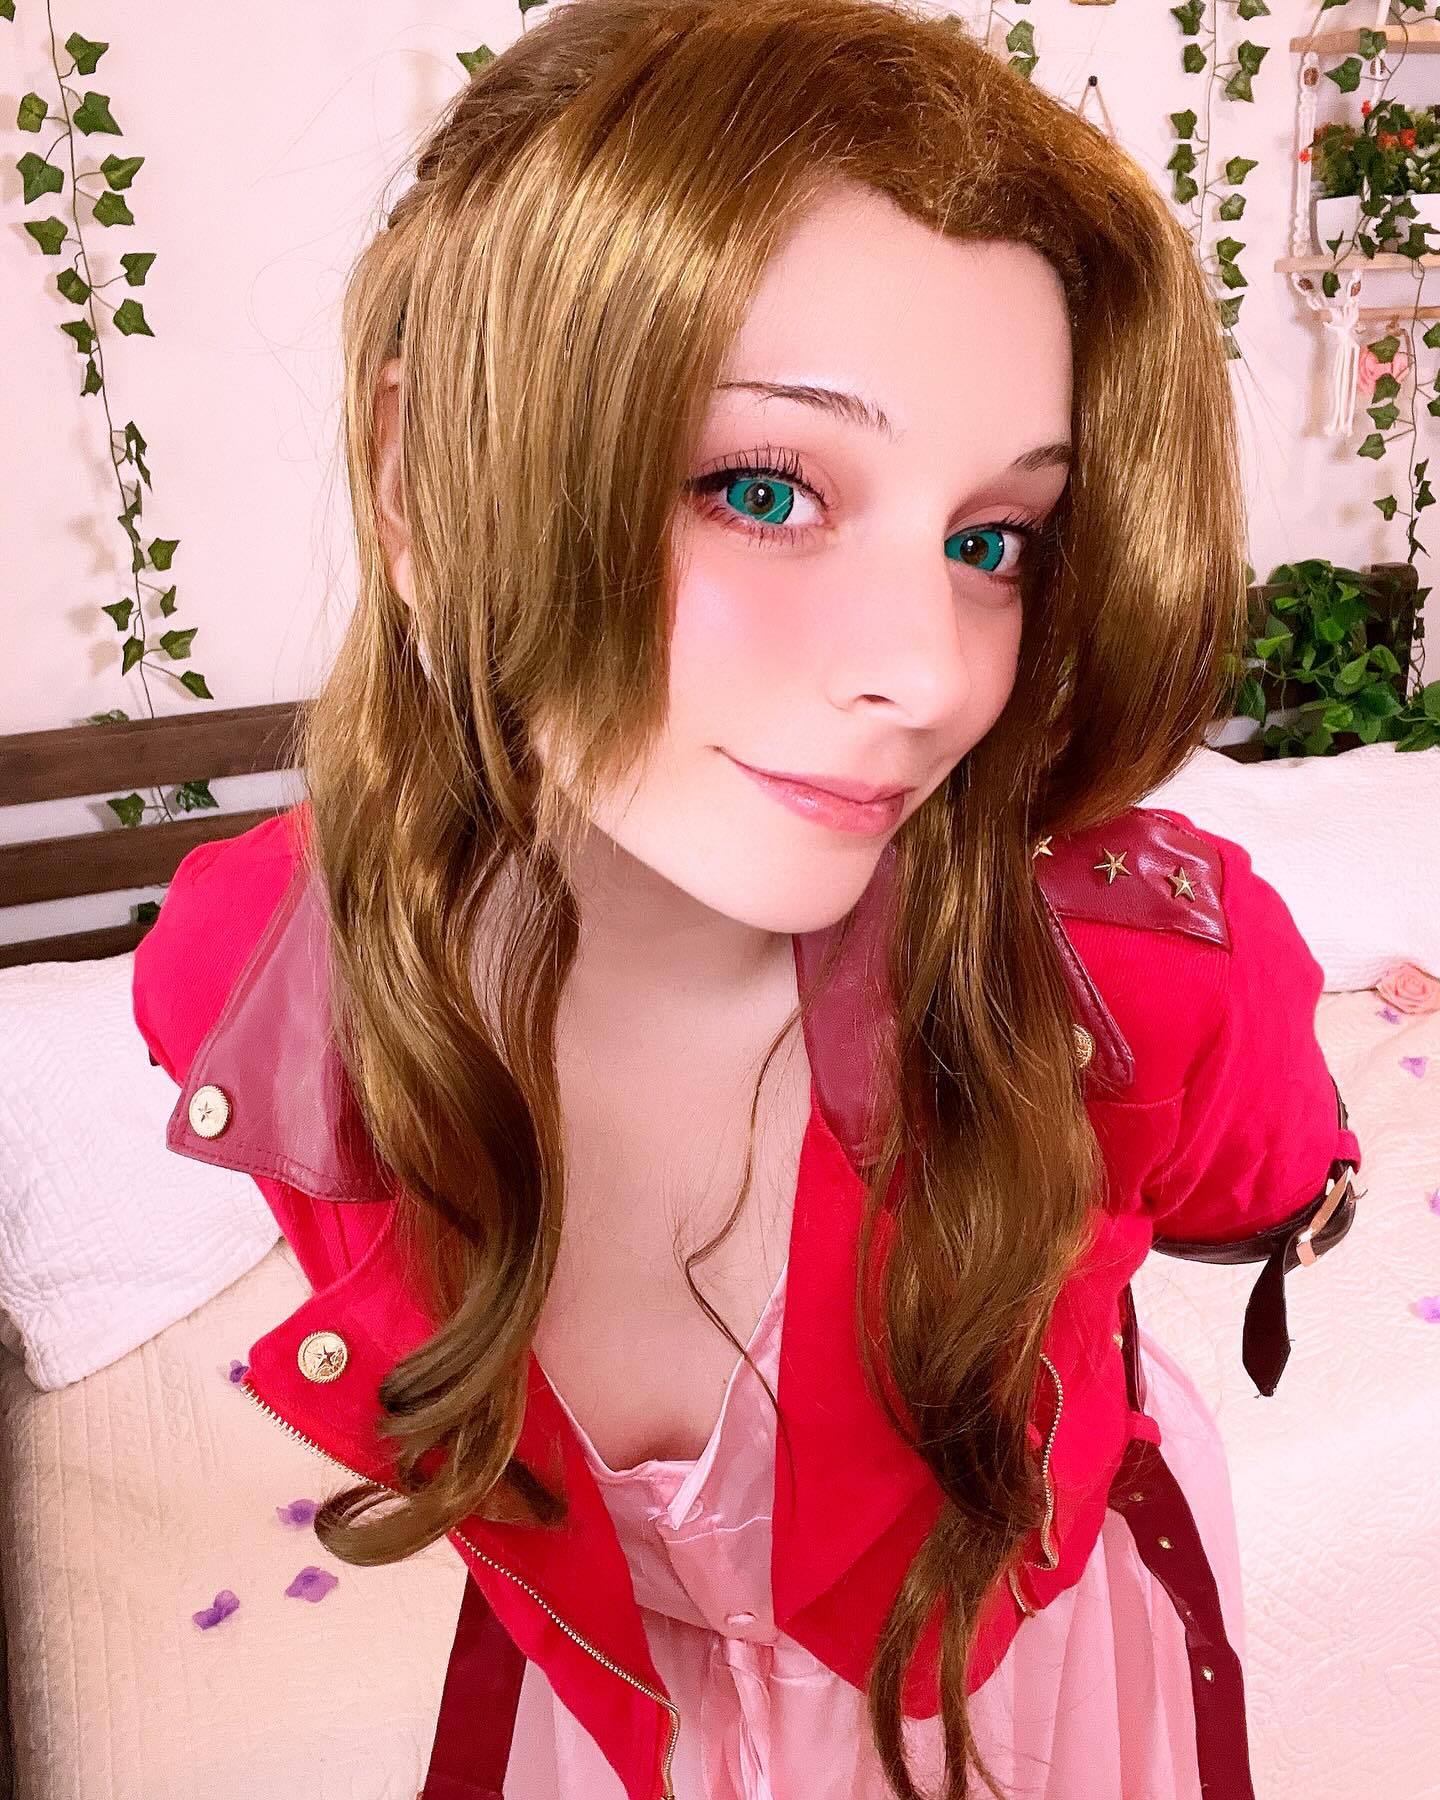 I wanted to bring back my Aerith cosplay! 🥰 Is anyone playing rebirth?? I REALLY want to play it but I don’t have a ps5 😭 

#aerith #aerithcosplay #finalfantasy #tiktok #gamer #gamergirl #gamergirls #girlgamer #egirl #twitchtv #twitch #twitchstreamer #streamer #femalestreamer #kawaii #anime #green #greenhair #petite #petitegirl #petitegirls #uwugirl #wifu #animewifu #cosplay #cosplayer #cosplaygirl #anime #weeb #softgirl